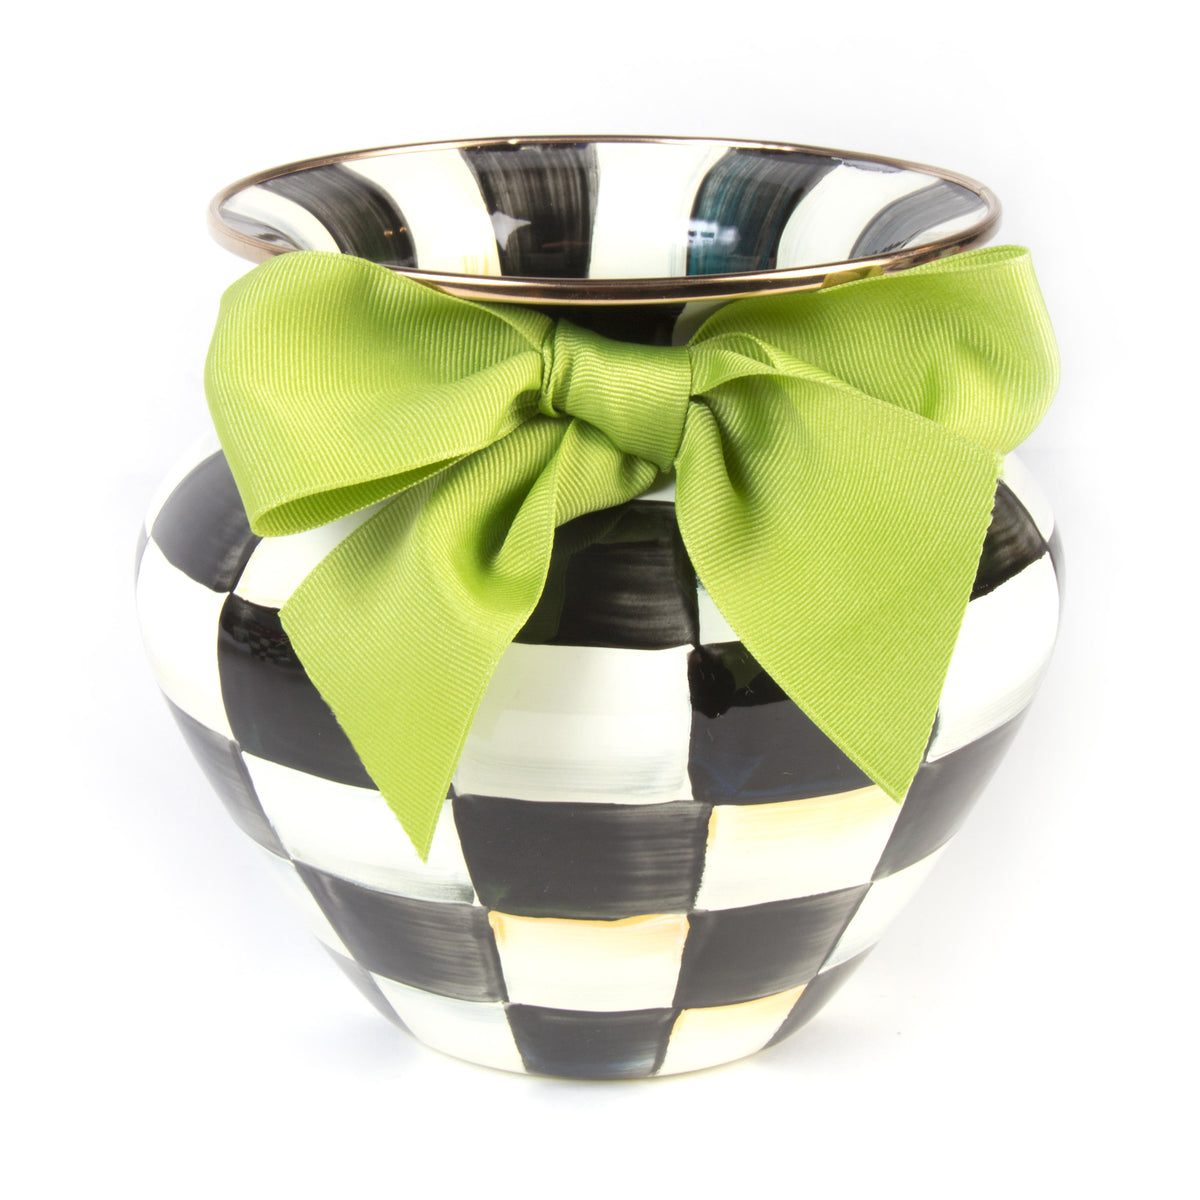 Courtly Check Enamel Vase - Green Bow